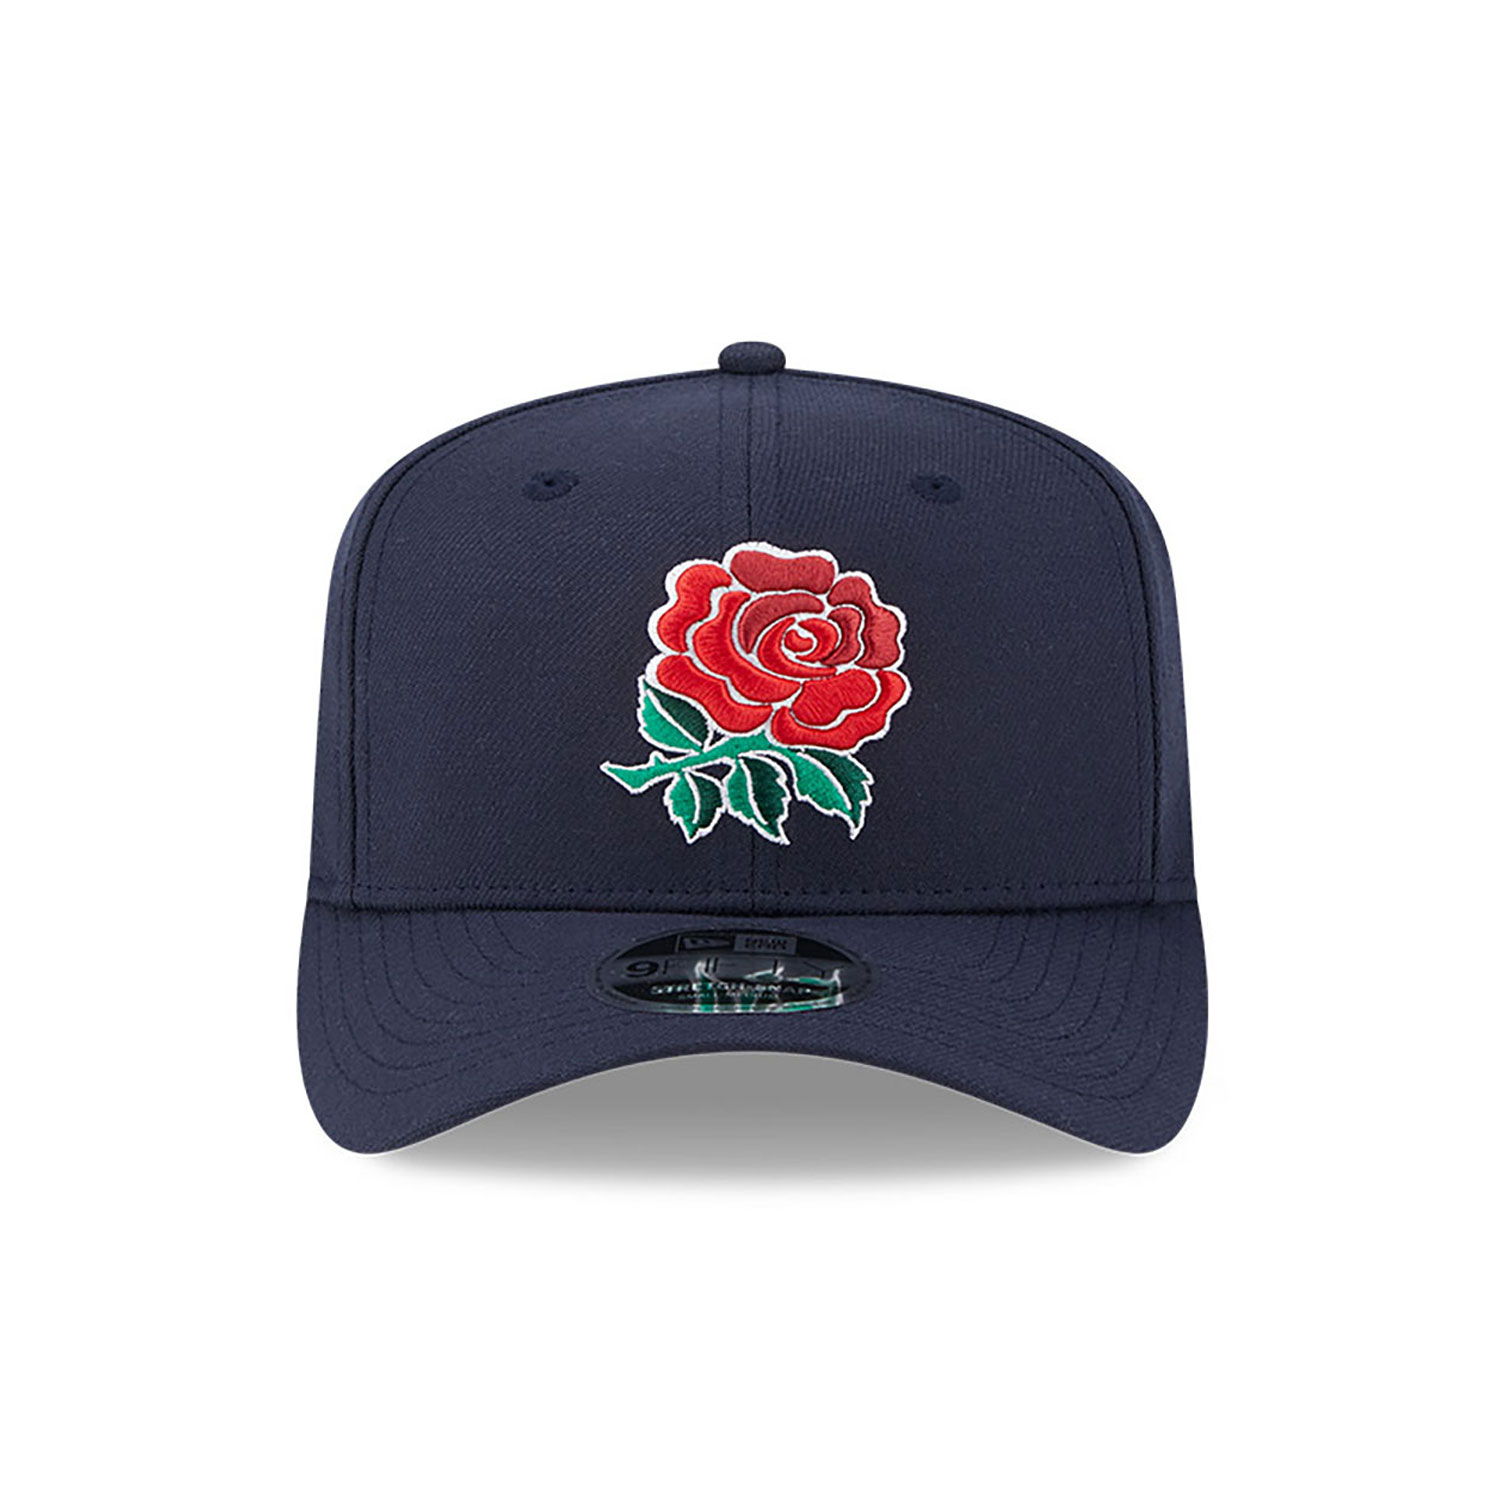 England Rugby Union Rose Navy Stretch Snap 9FIFTY Cap